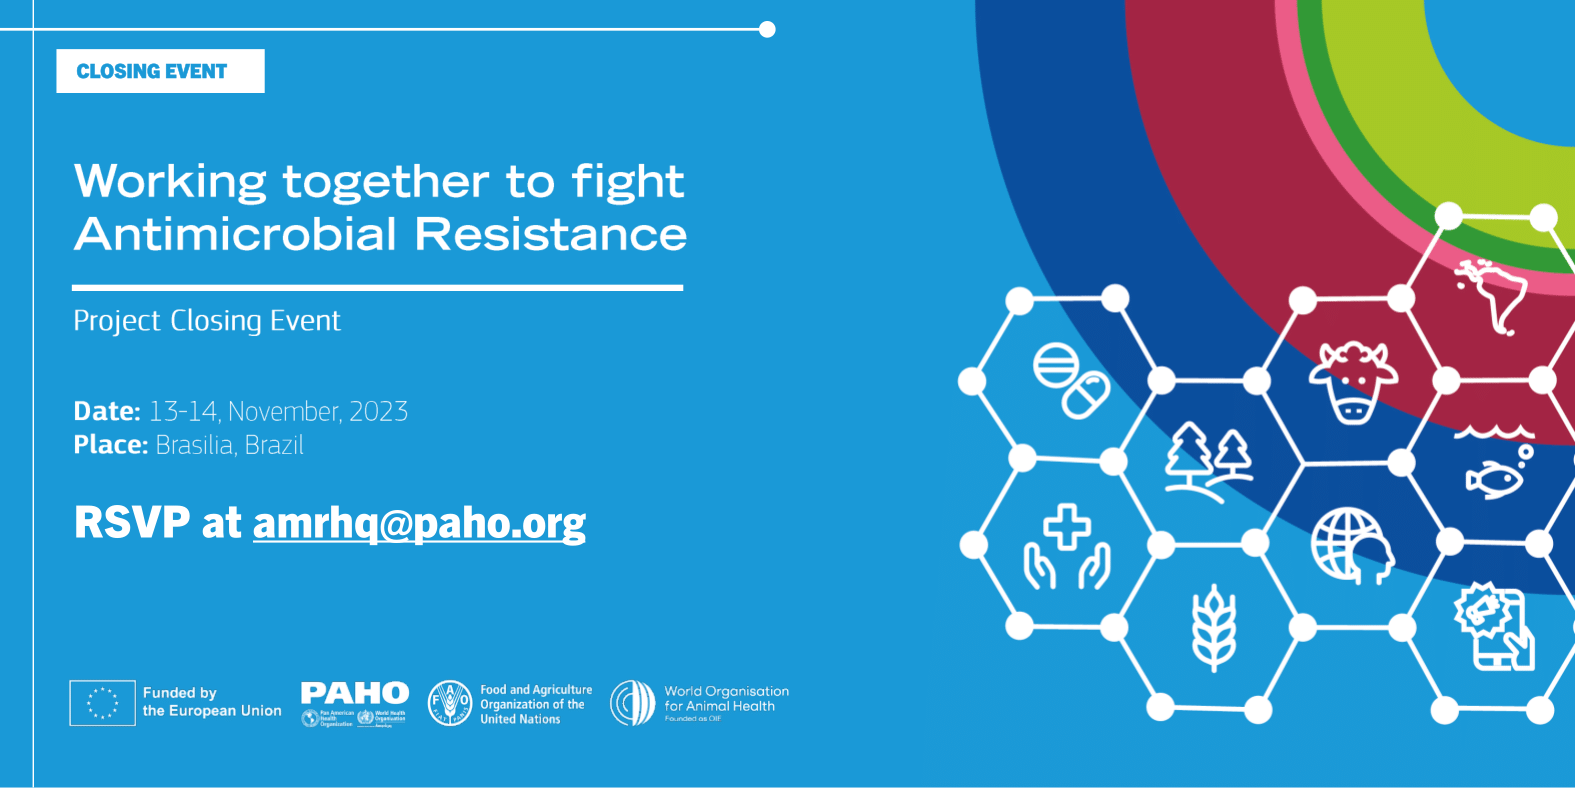 Project Closing Event: Working Together to Fight Antimicrobial Resistance